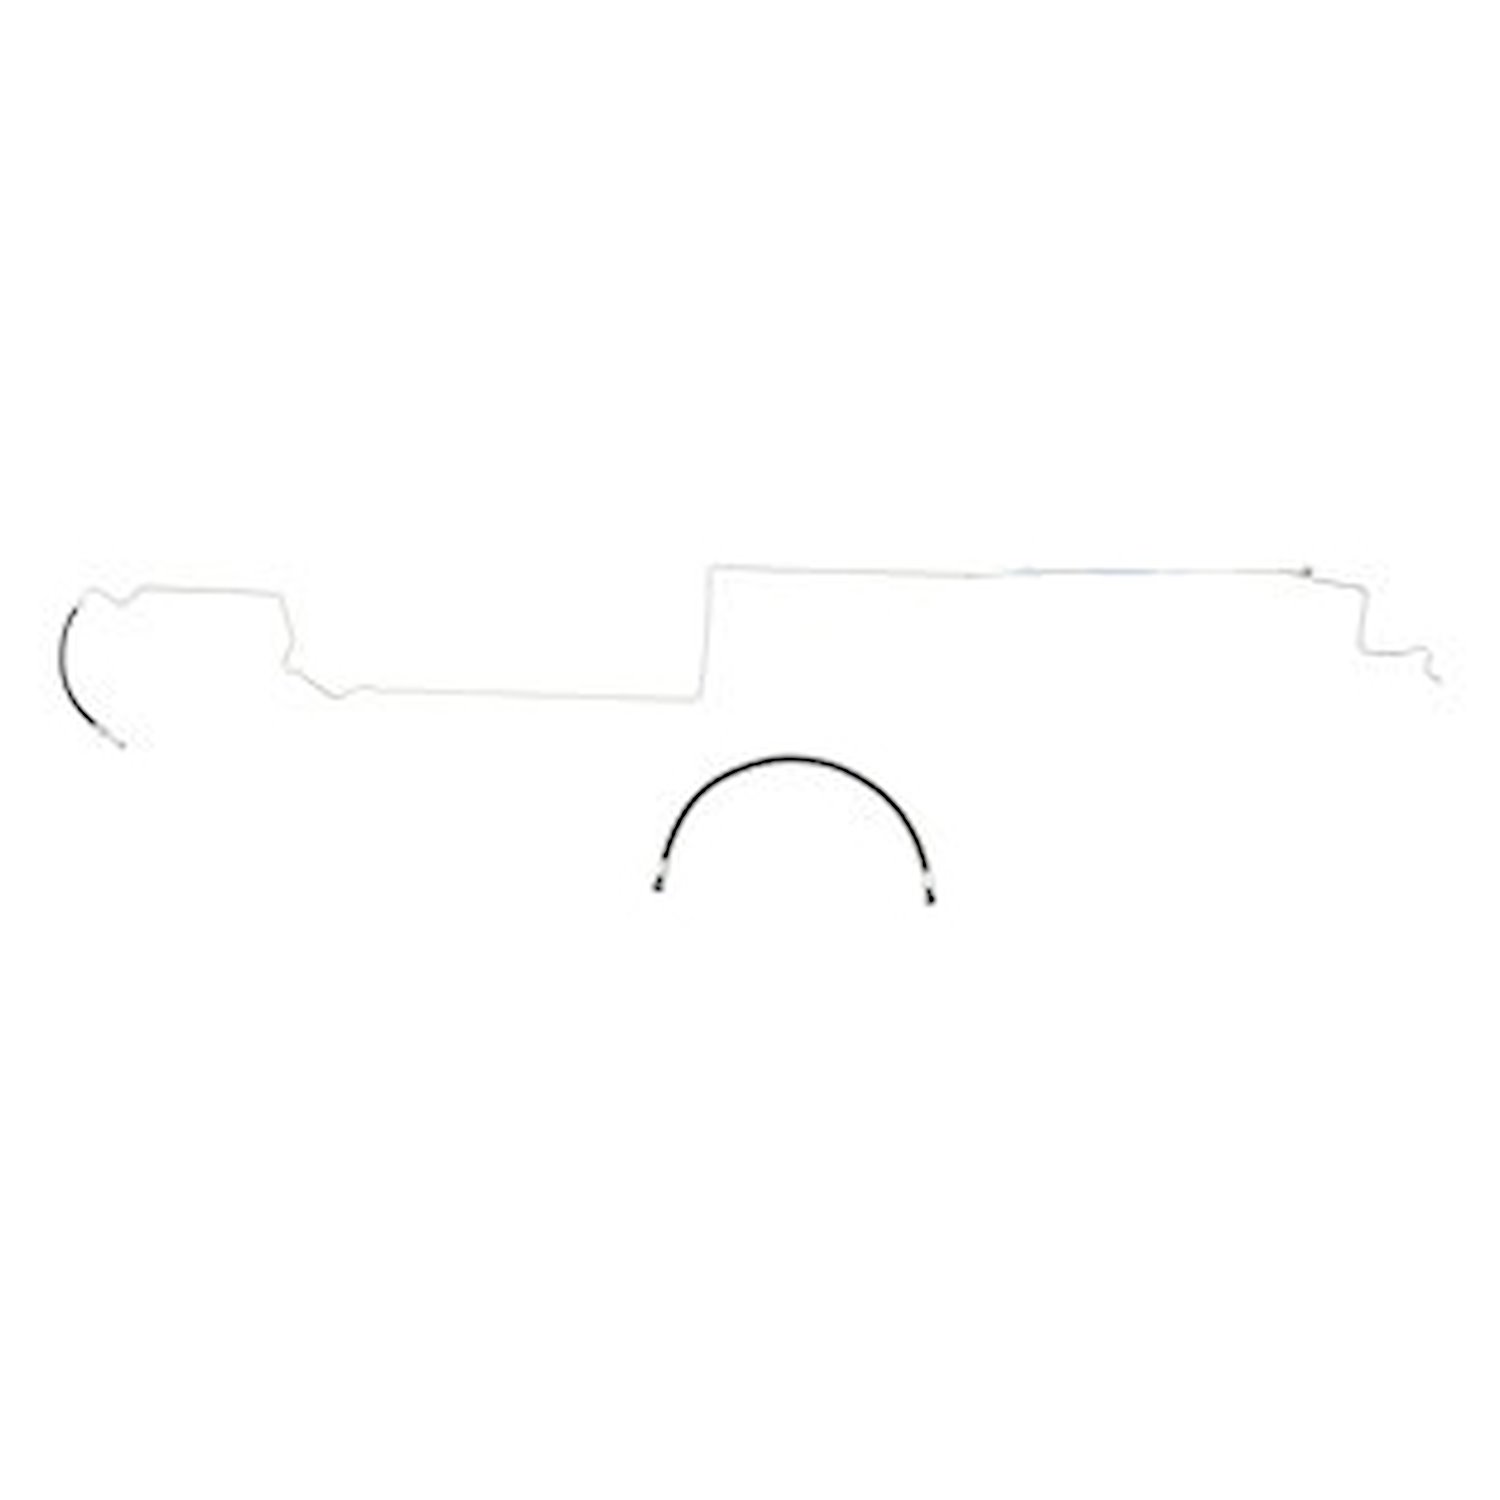 Ford Mustang Fuel Return Line -1986 1987 1988 1989 1990 1991 1992 1993